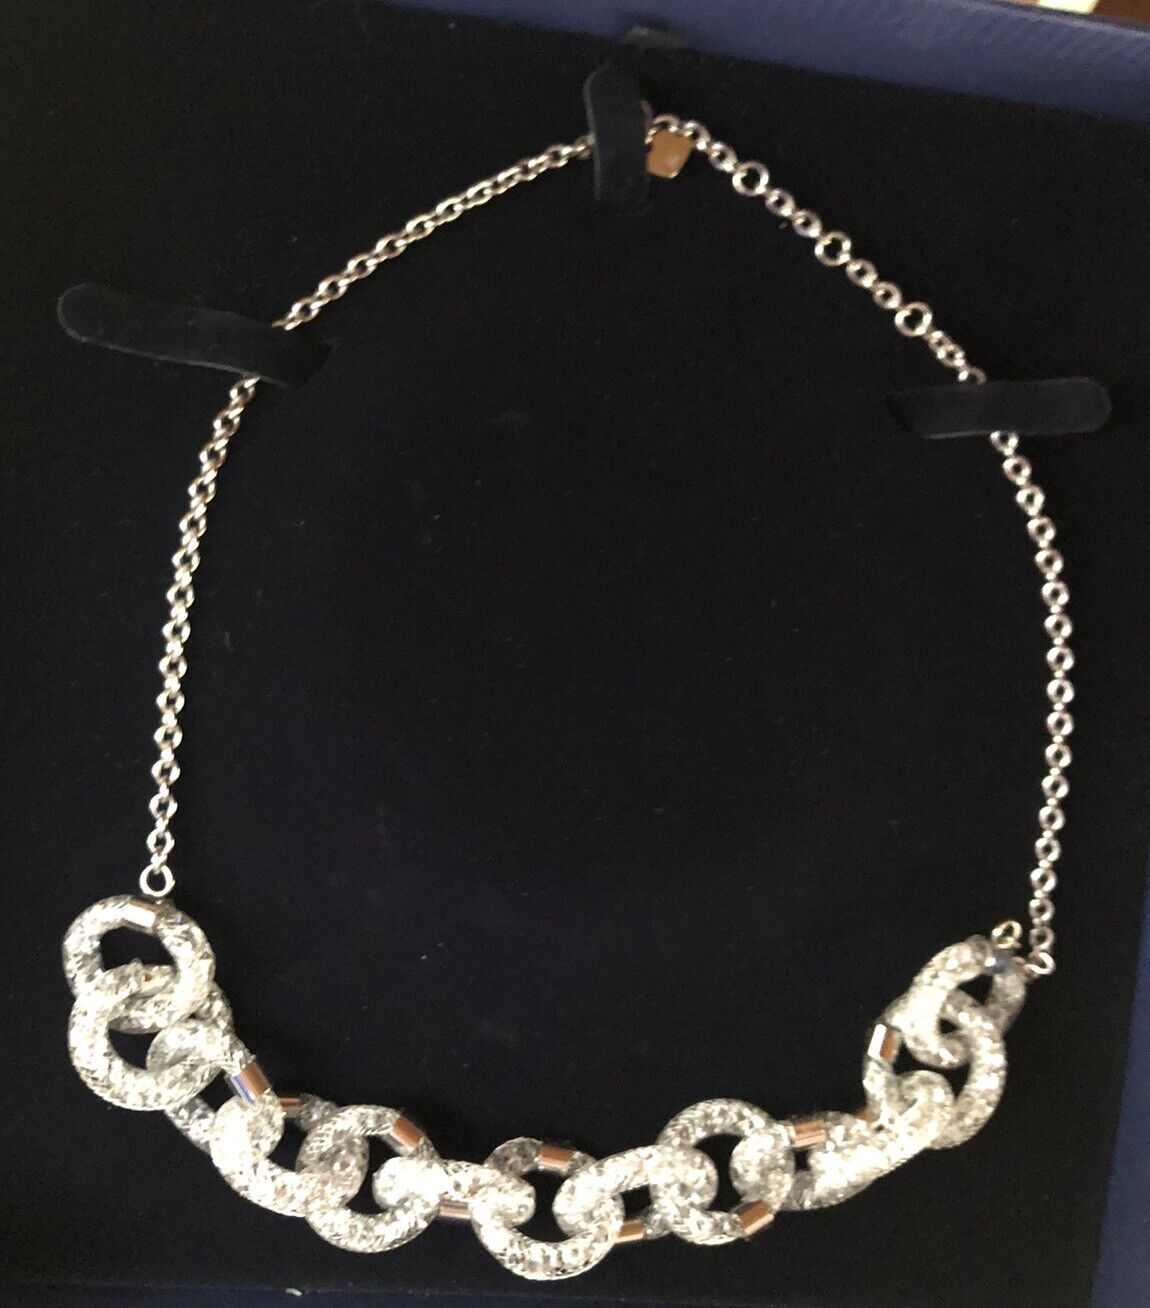 Swarovski Crystal 5180117 Chain Link Stardust White Crystal Plated  Necklace 18”